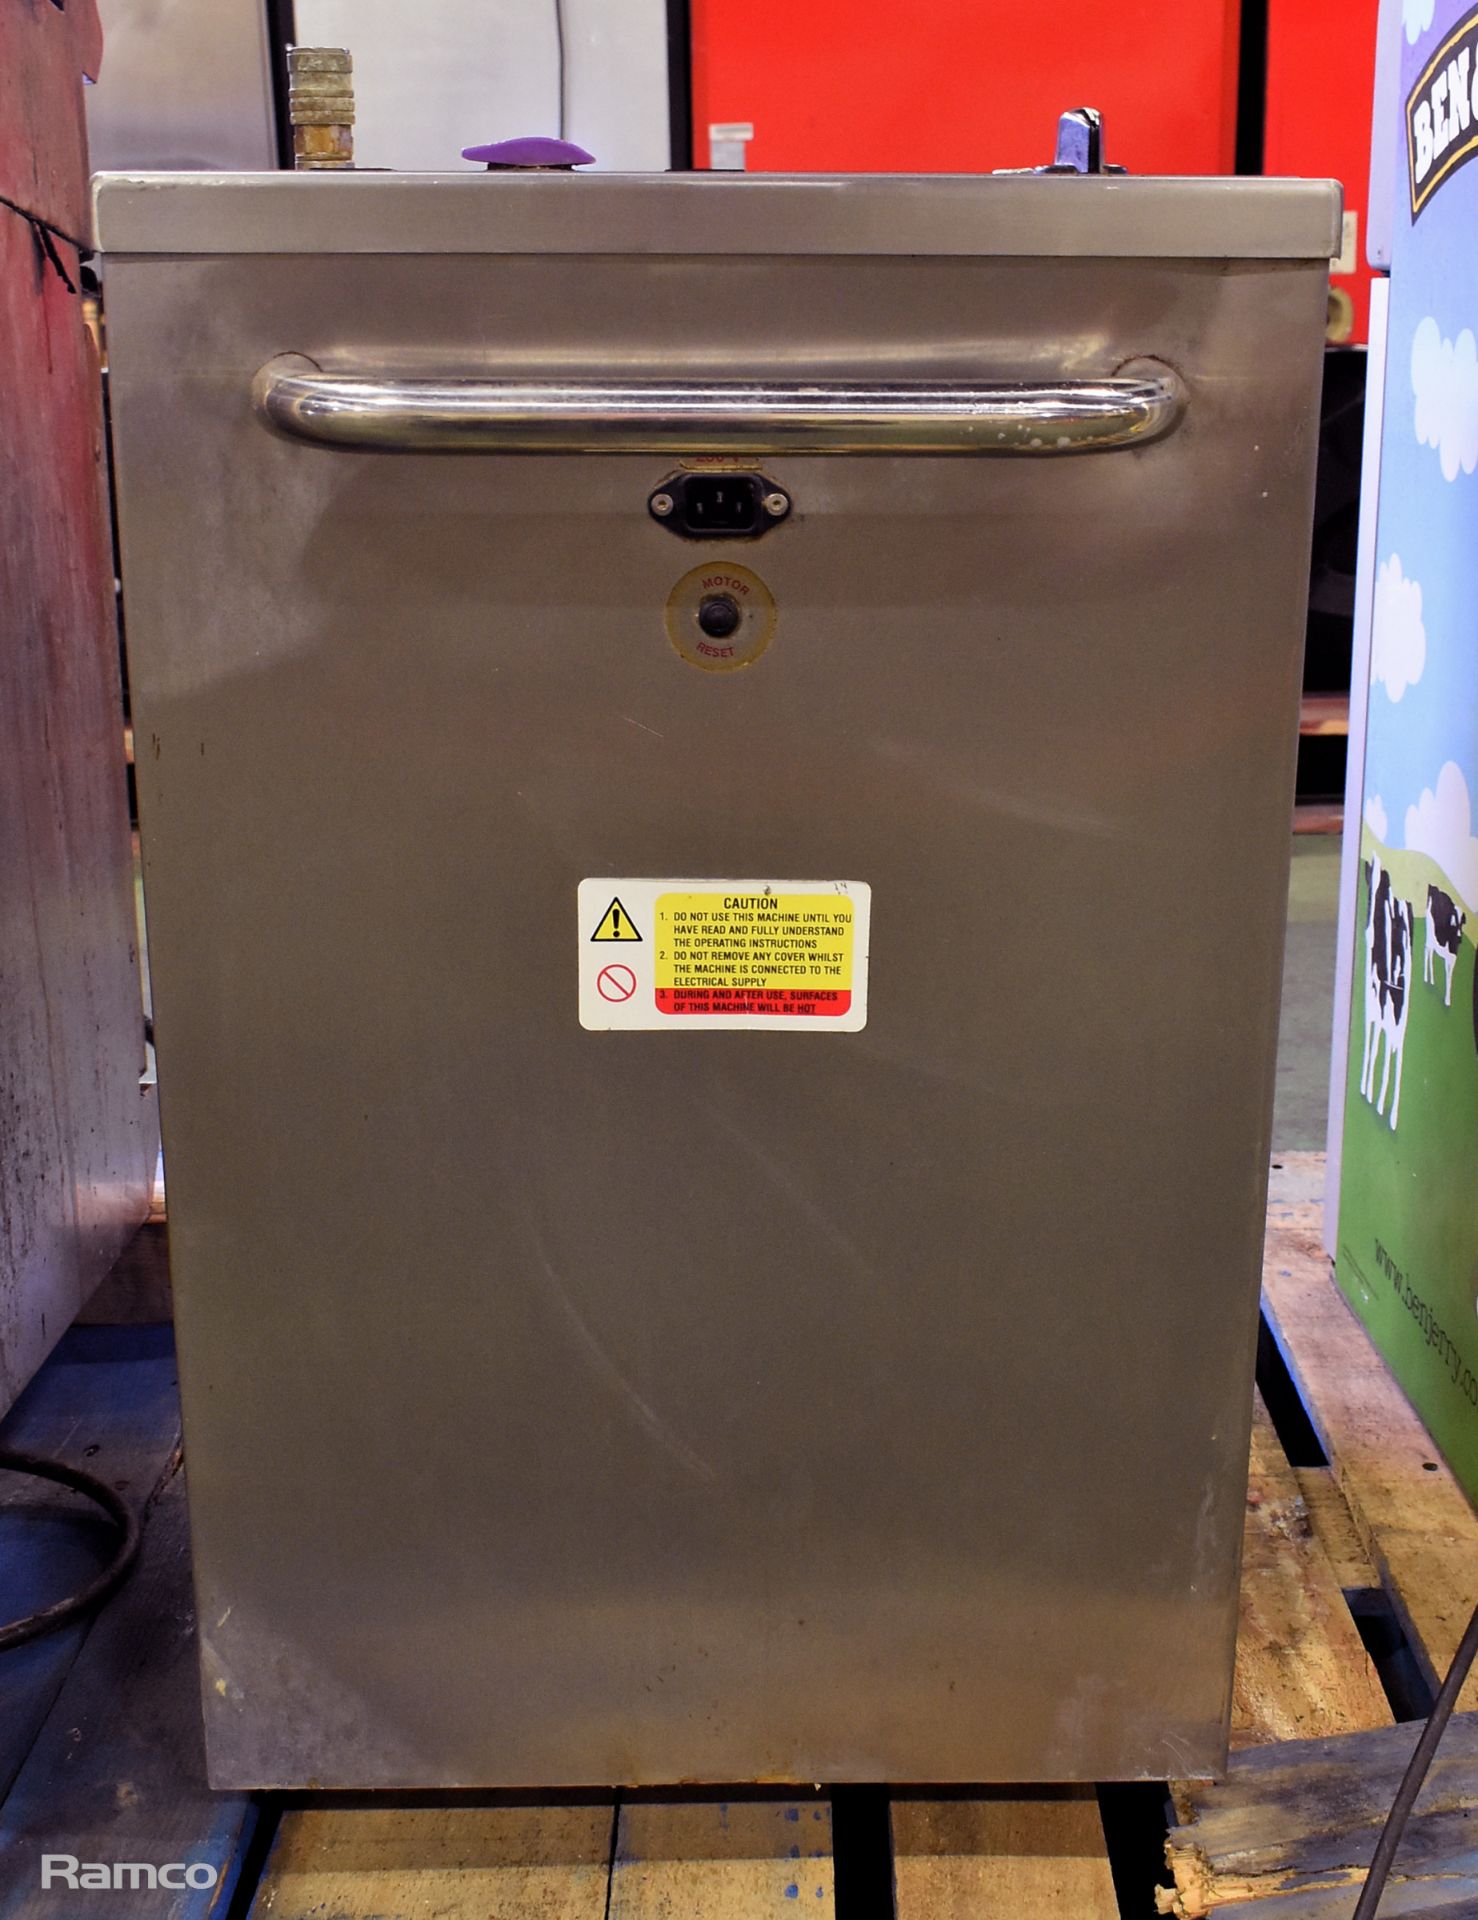 Merlin Filtration Top Fry stainless steel oil fat filter machine - Image 4 of 5